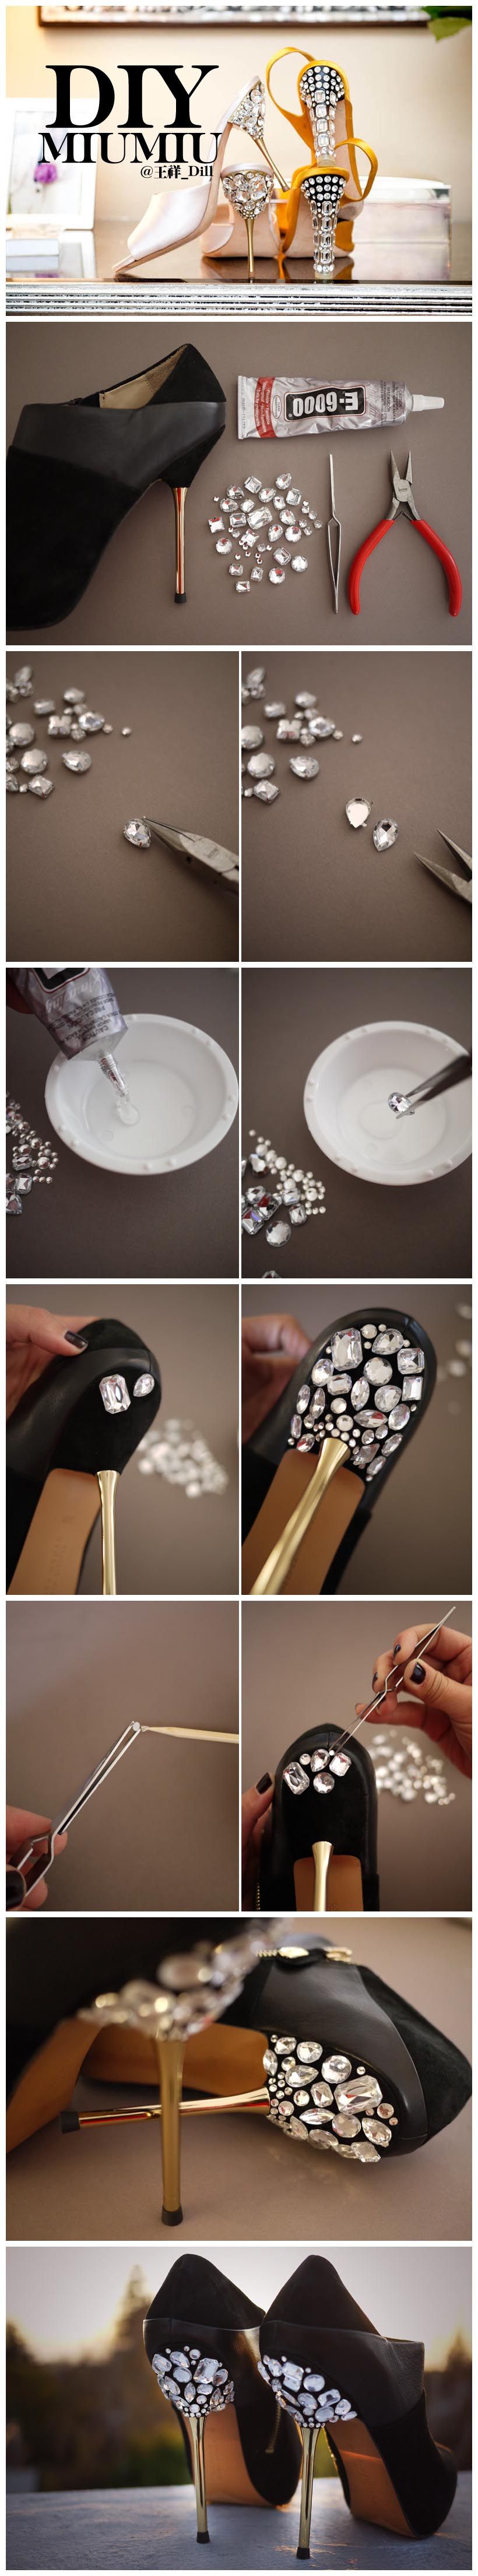 DIY put your own sparkles on shoes